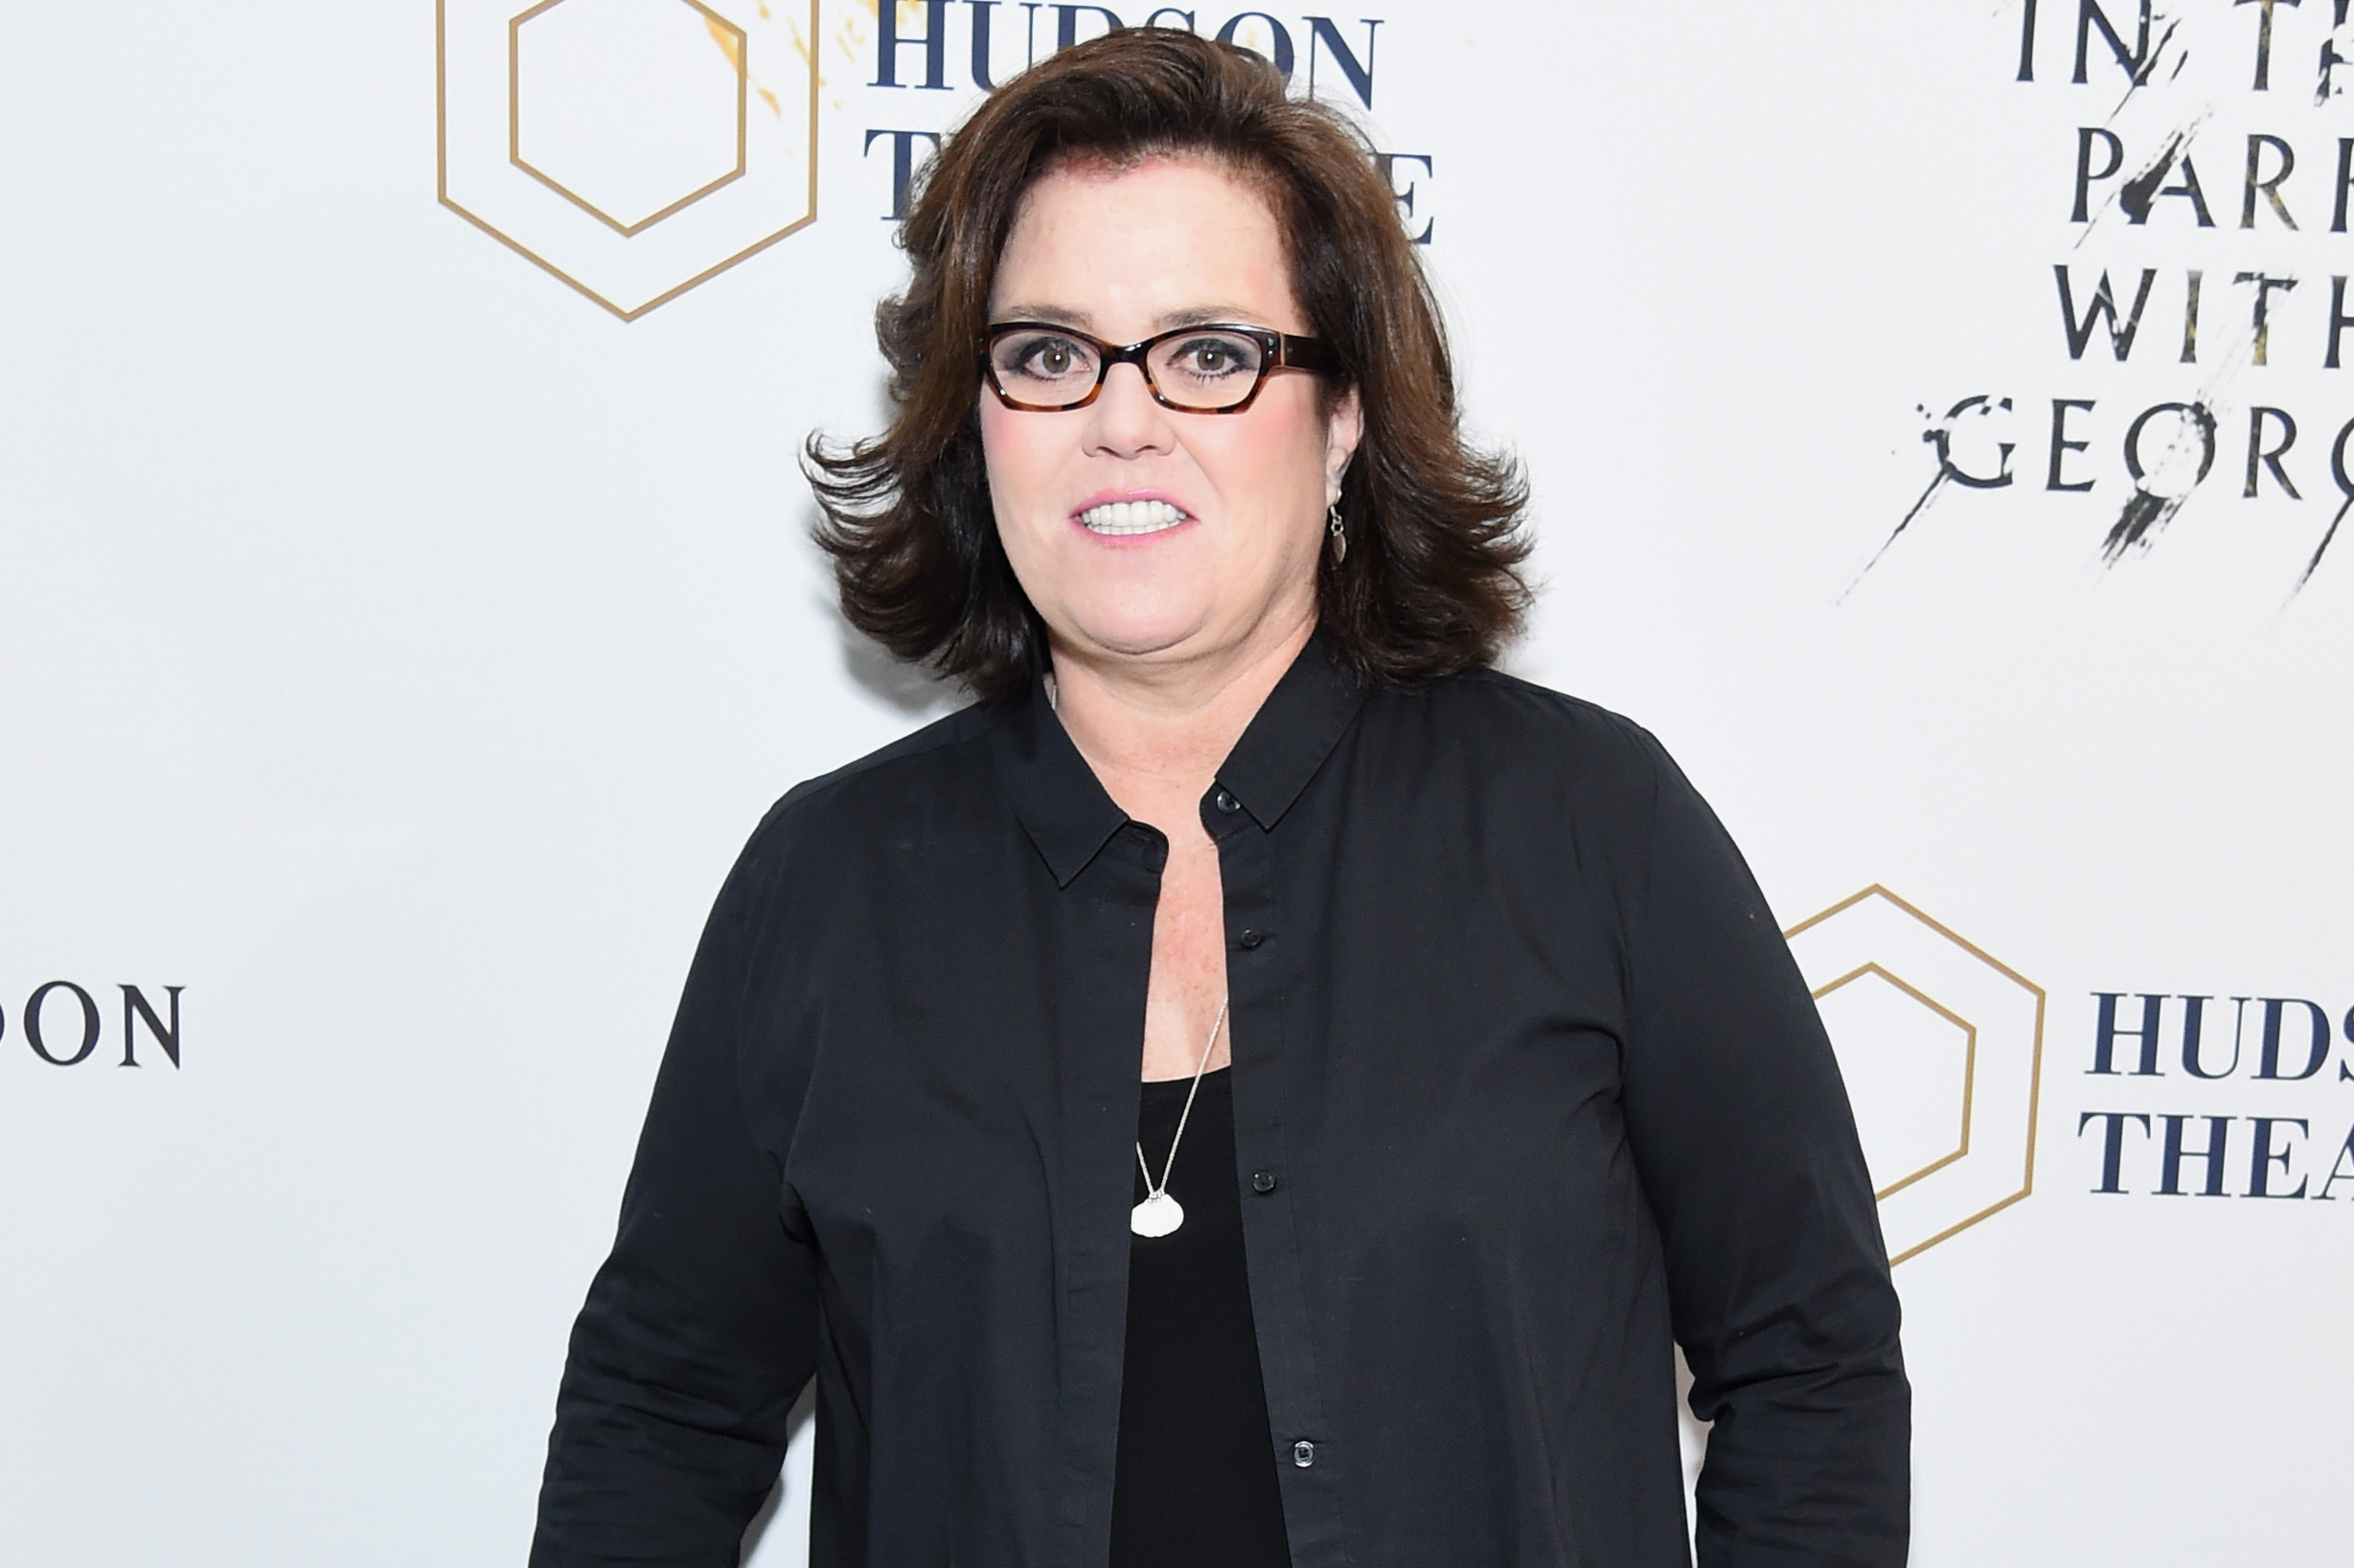 Rosie O'Donnell, on Feb. 23, 2017 in New York City. (Michael Loccisano—Getty Images)